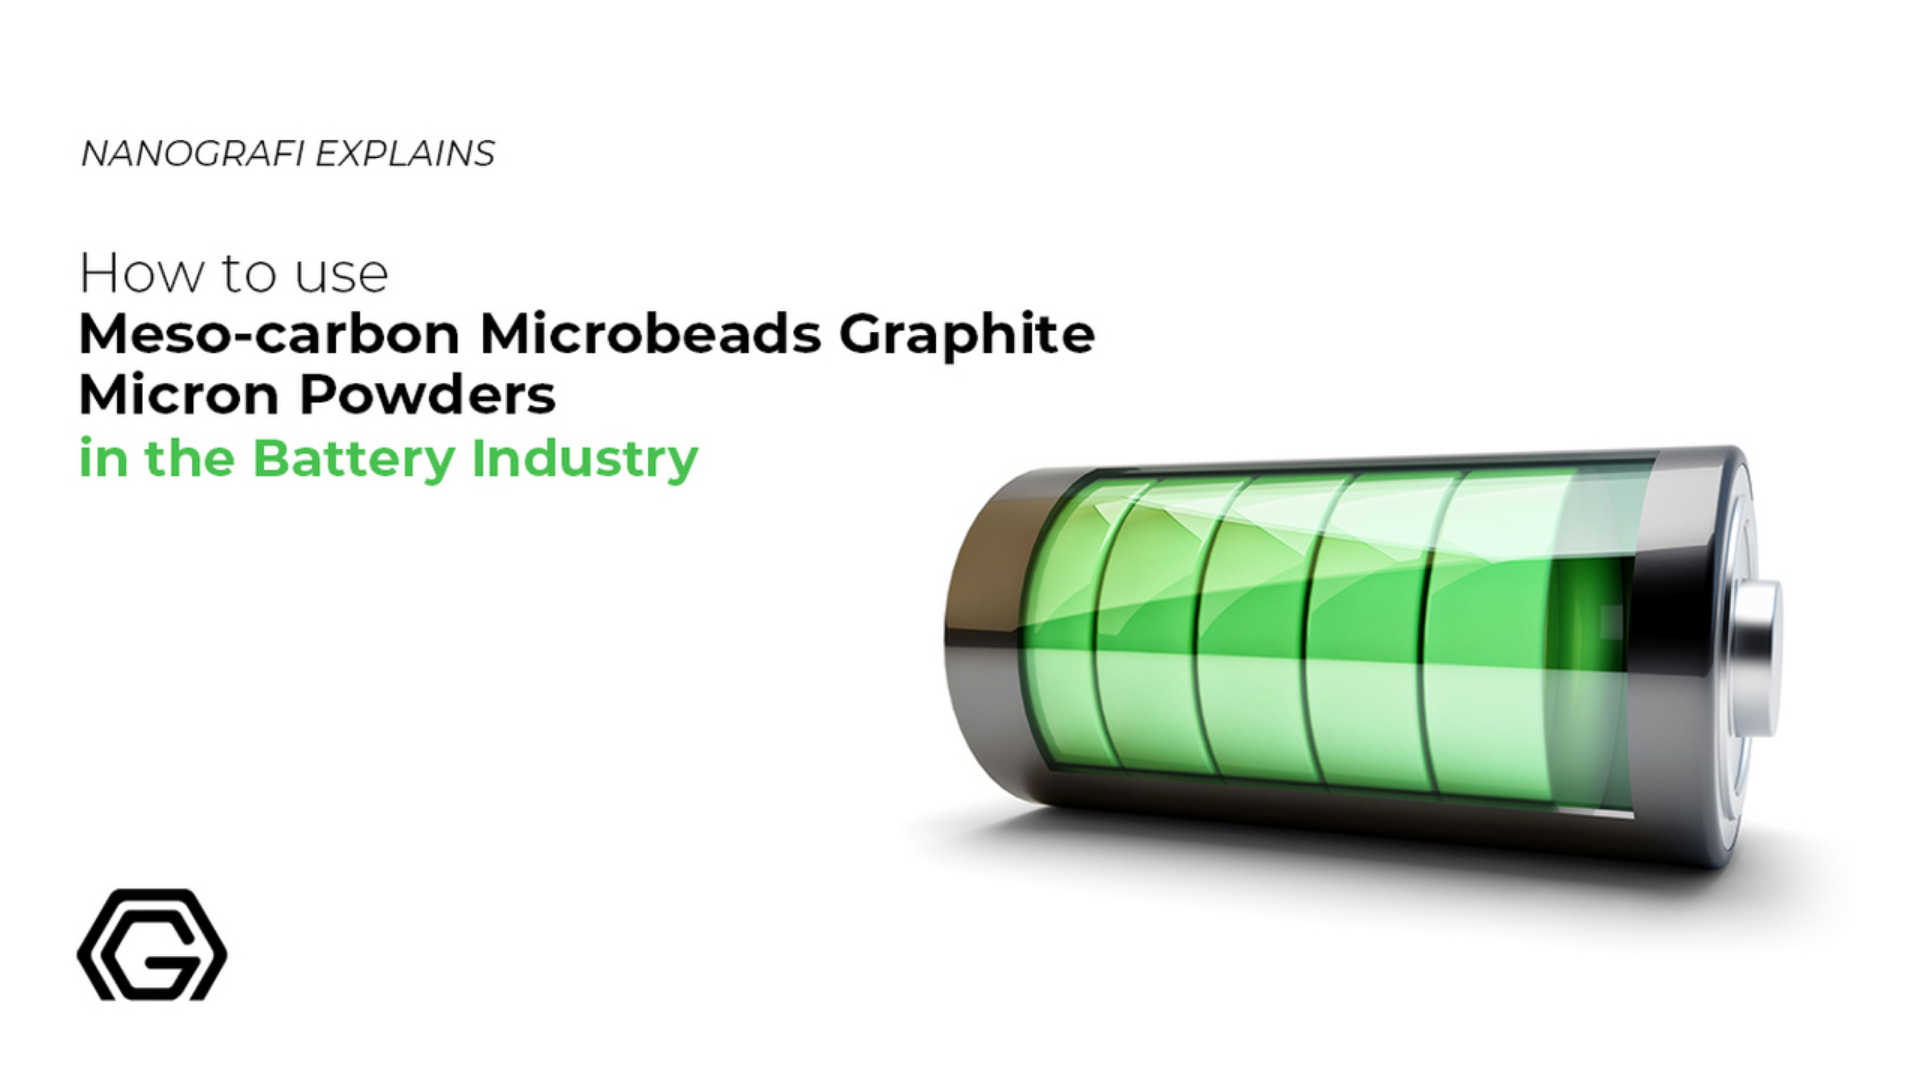 Meso-carbon microbeads Graphite micron powders in the battery industry